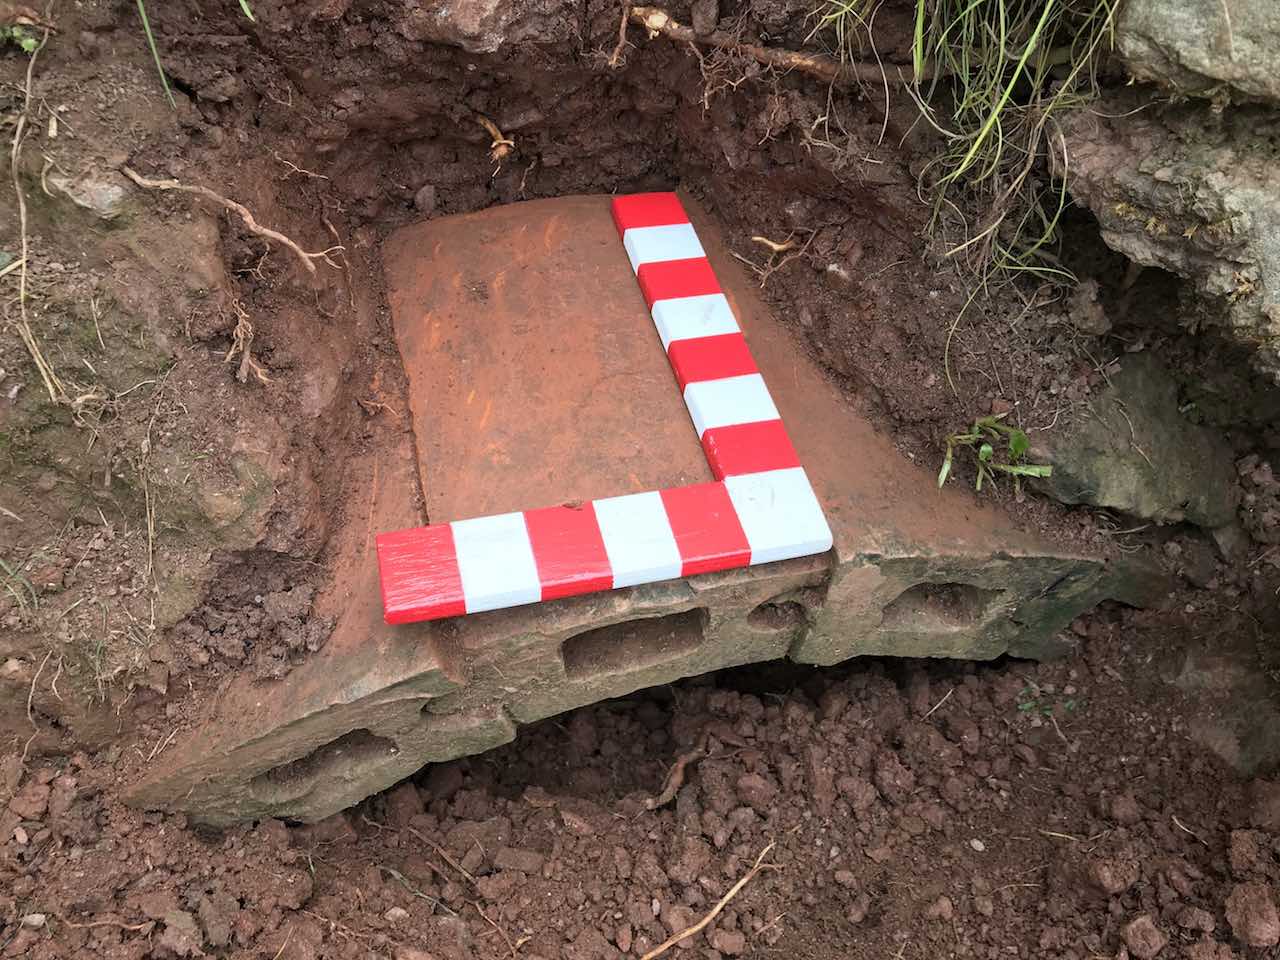 Nether Stowey OB escape tunnel exit cleaned up - unusual tiles